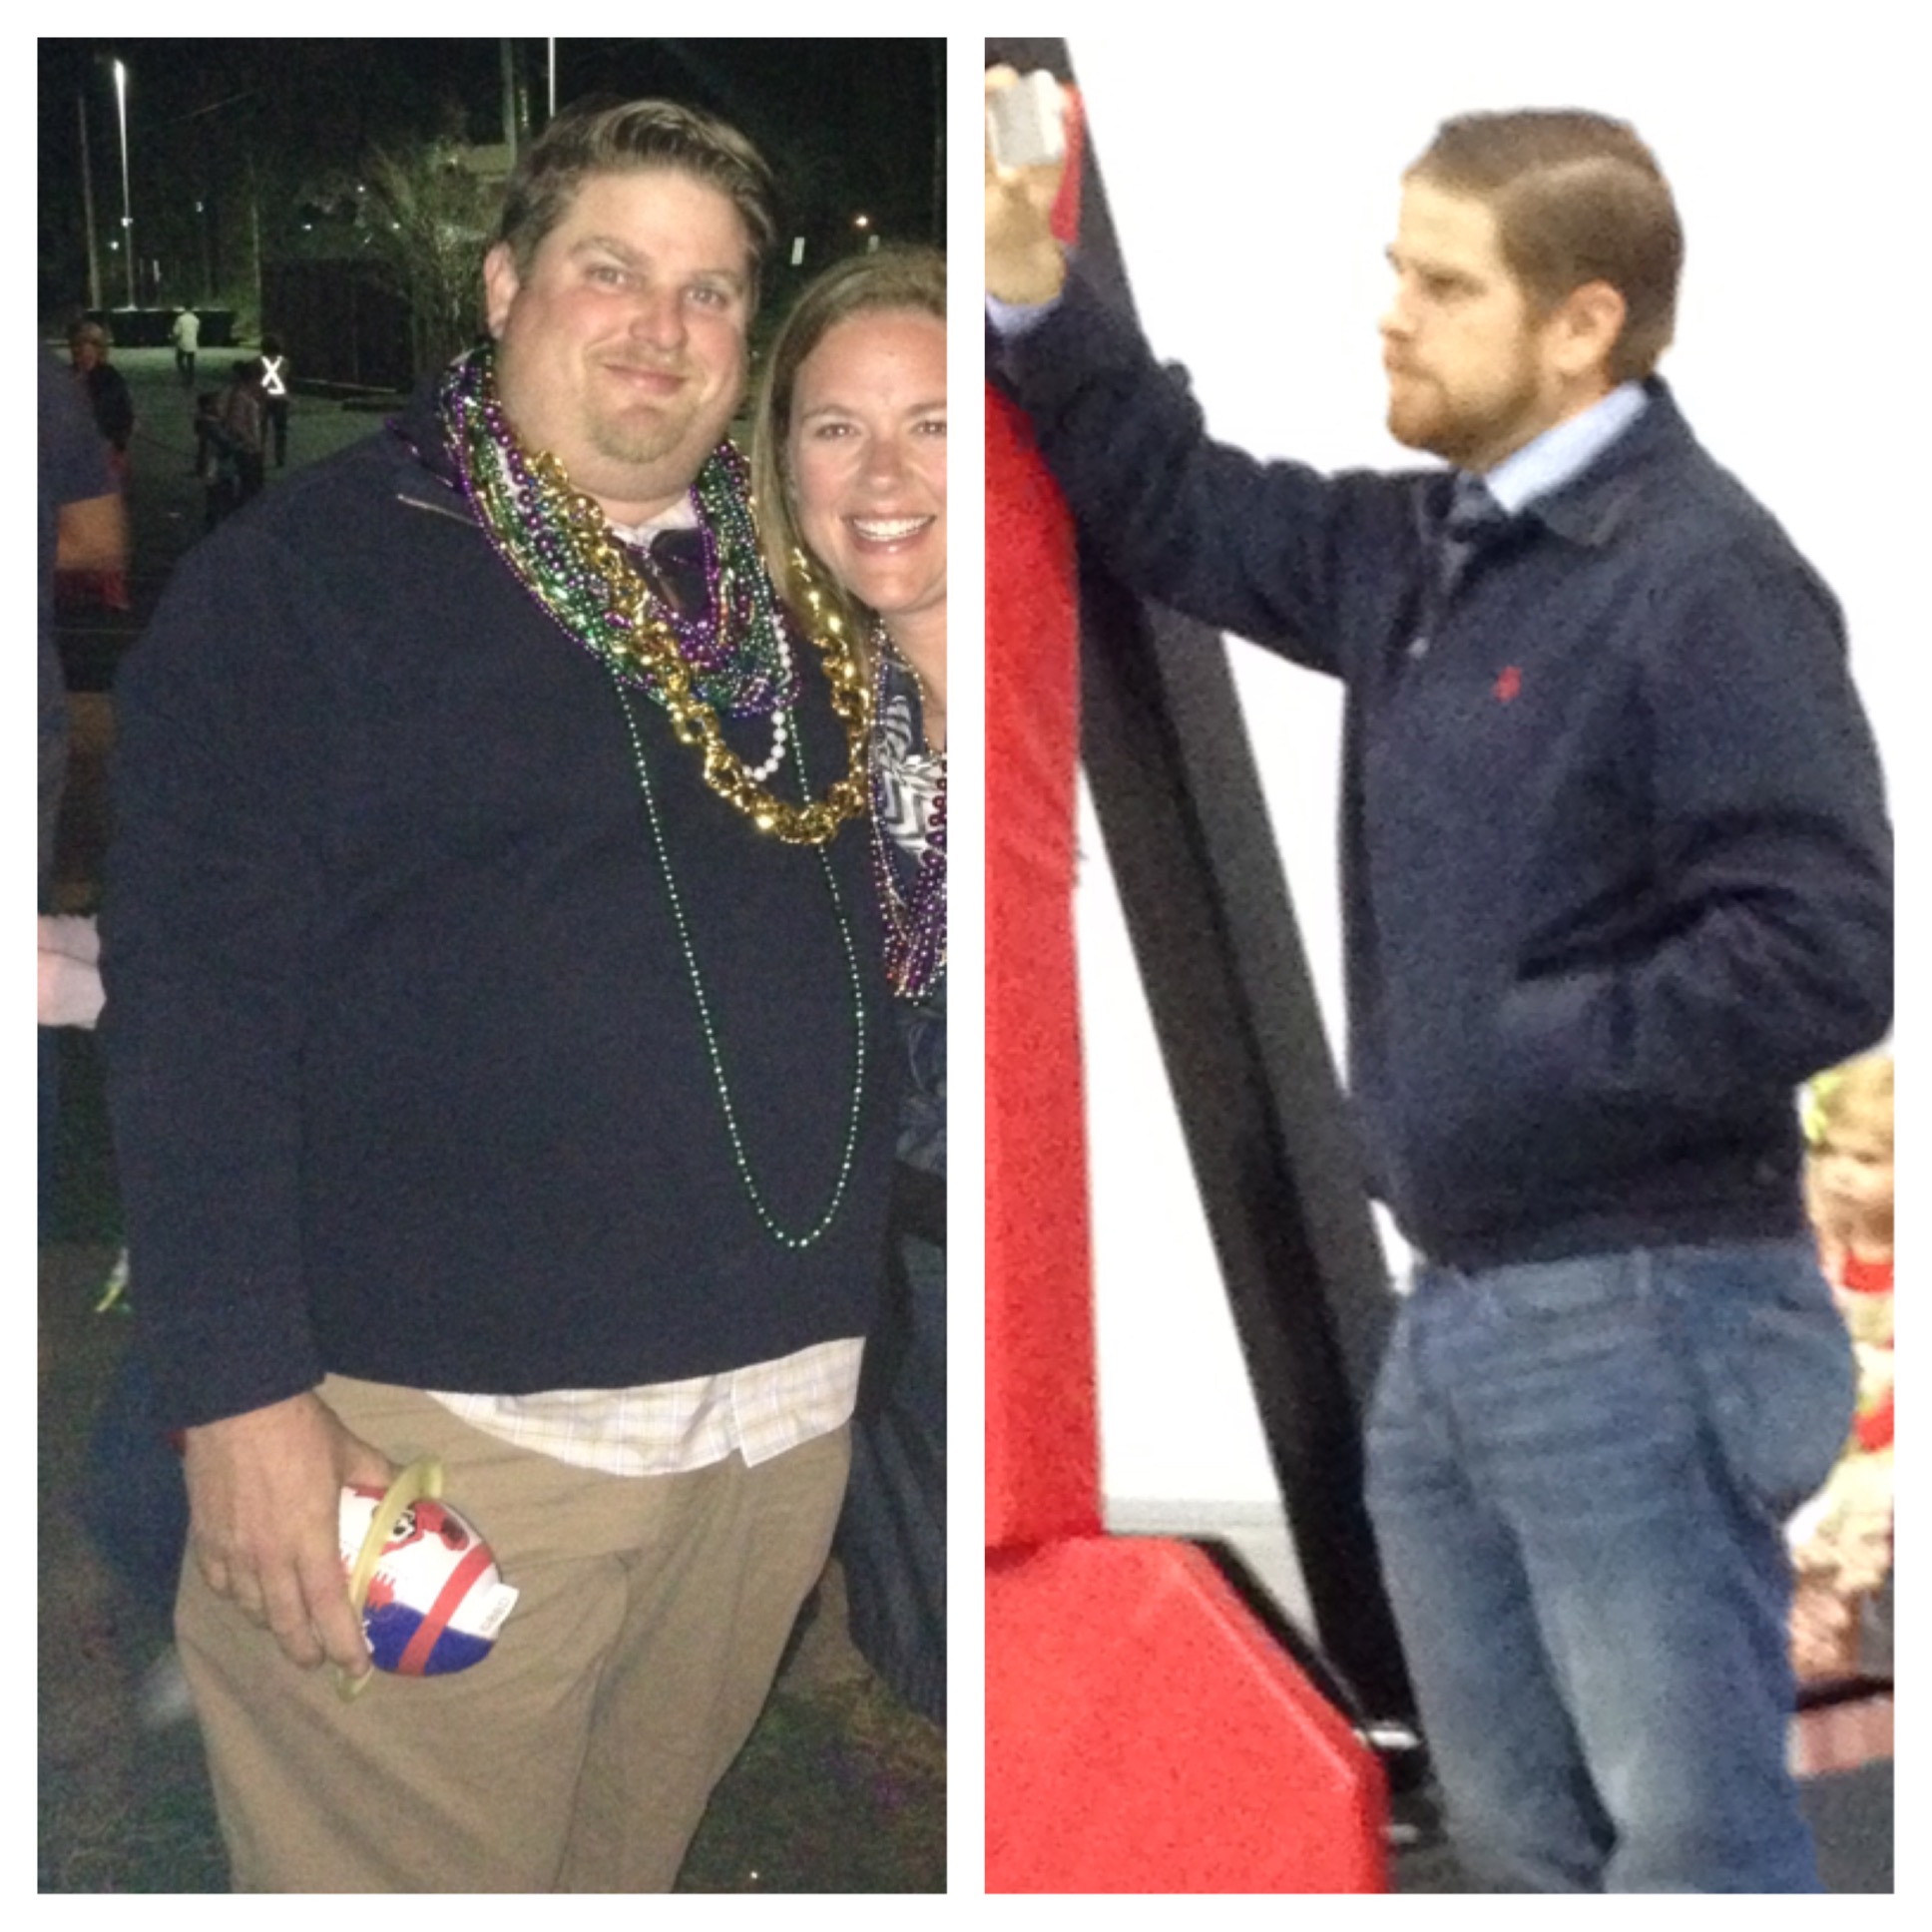 PHOTO: Matt Howell went from 320 pounds to 165 pounds in 11 months.